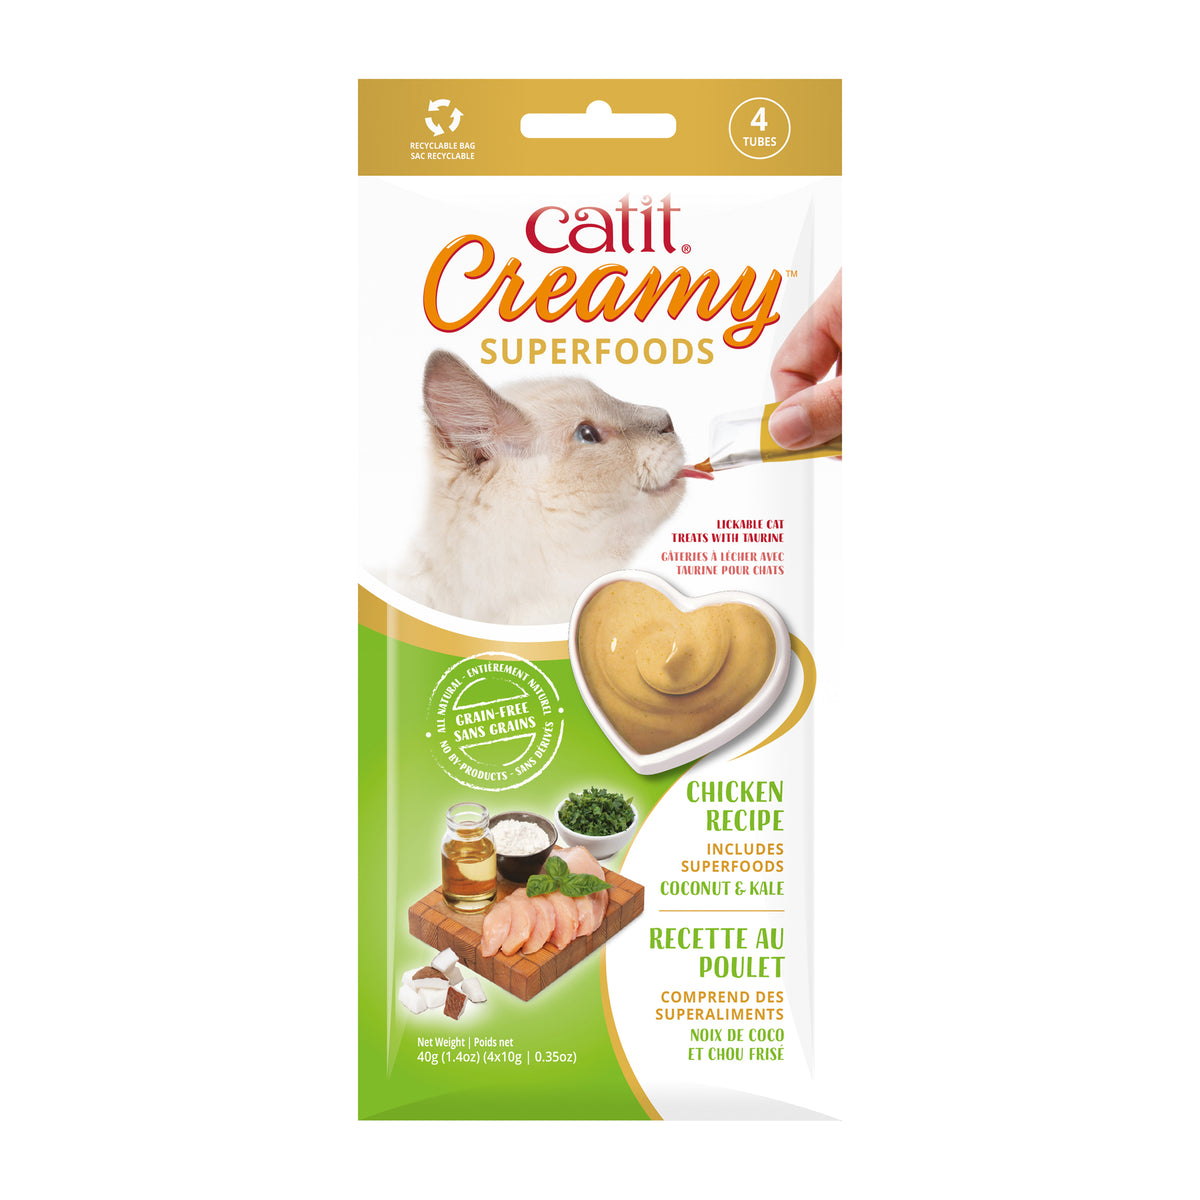 Catit Creamy Superfood Cat Treat - Chicken with Coconut and Kale - 4 pack